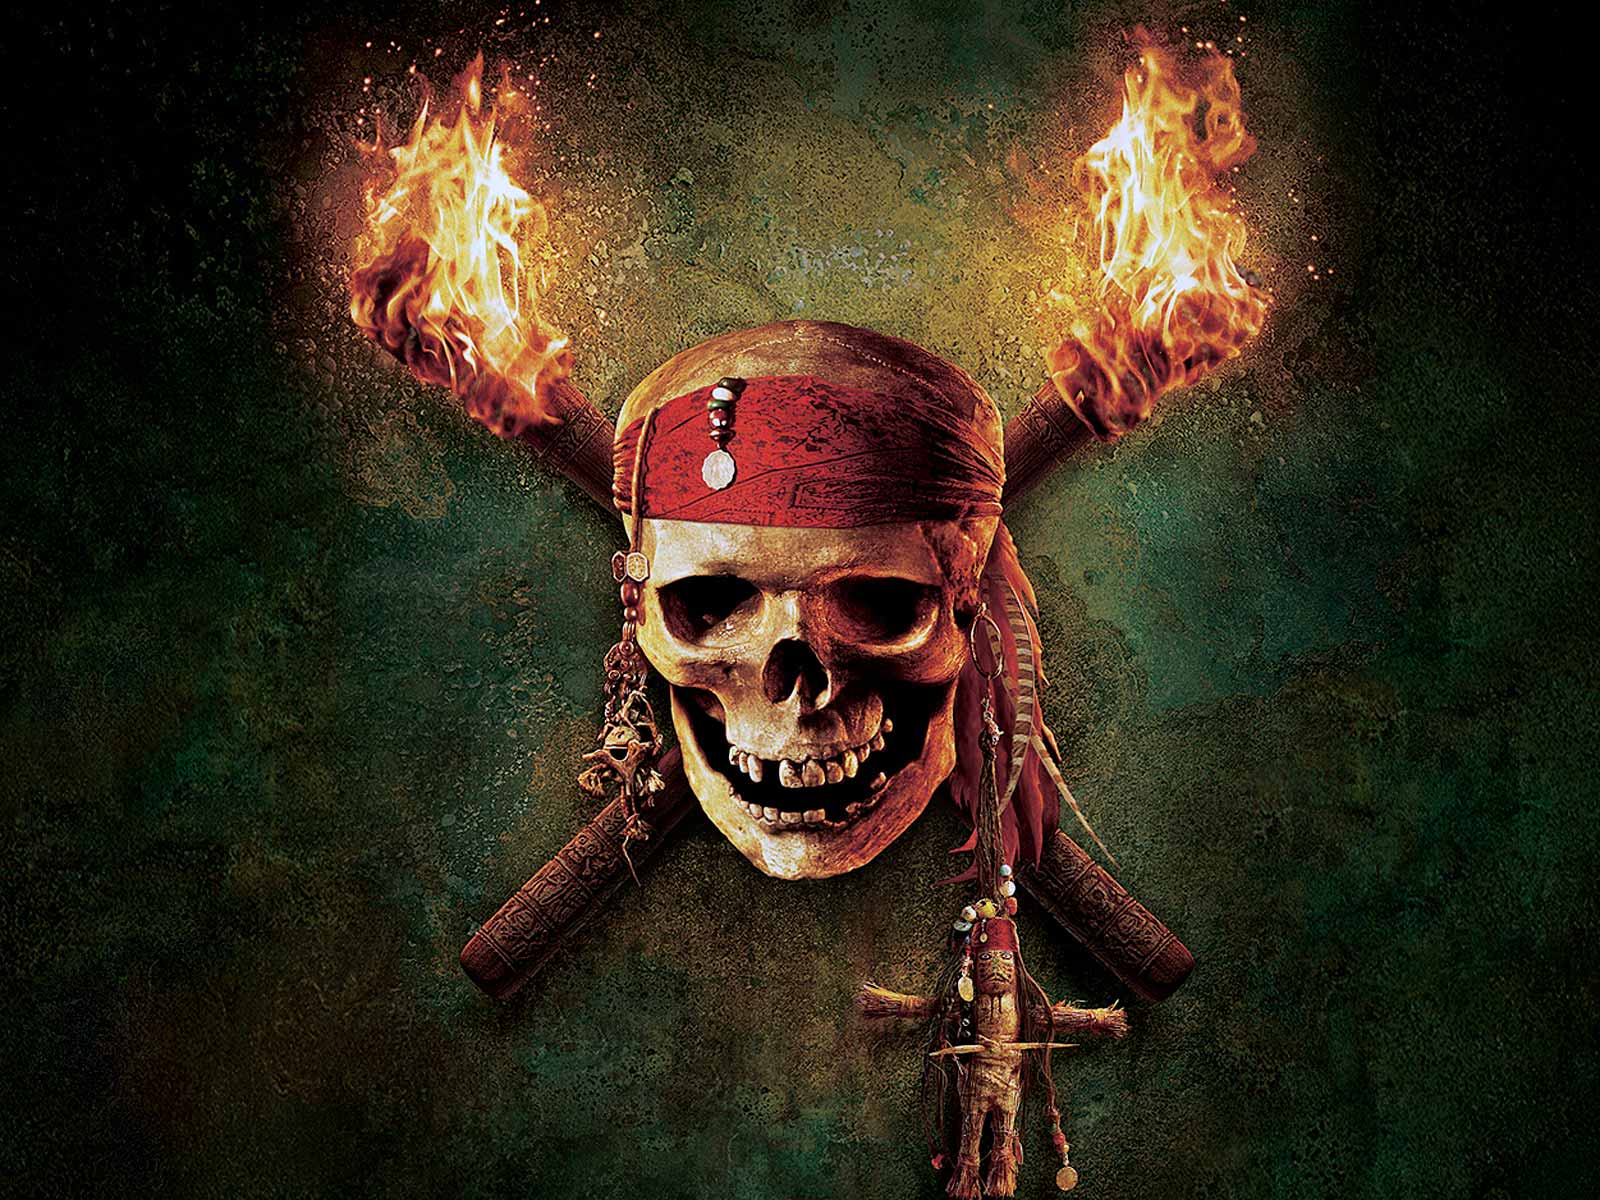 Free download pirate skull logo from the Pirates of the Caribbean movies wallpaper [1600x1200] for your Desktop, Mobile & Tablet. Explore Pirate Skull Wallpaper. Skull And Bones Wallpaper, Pirate